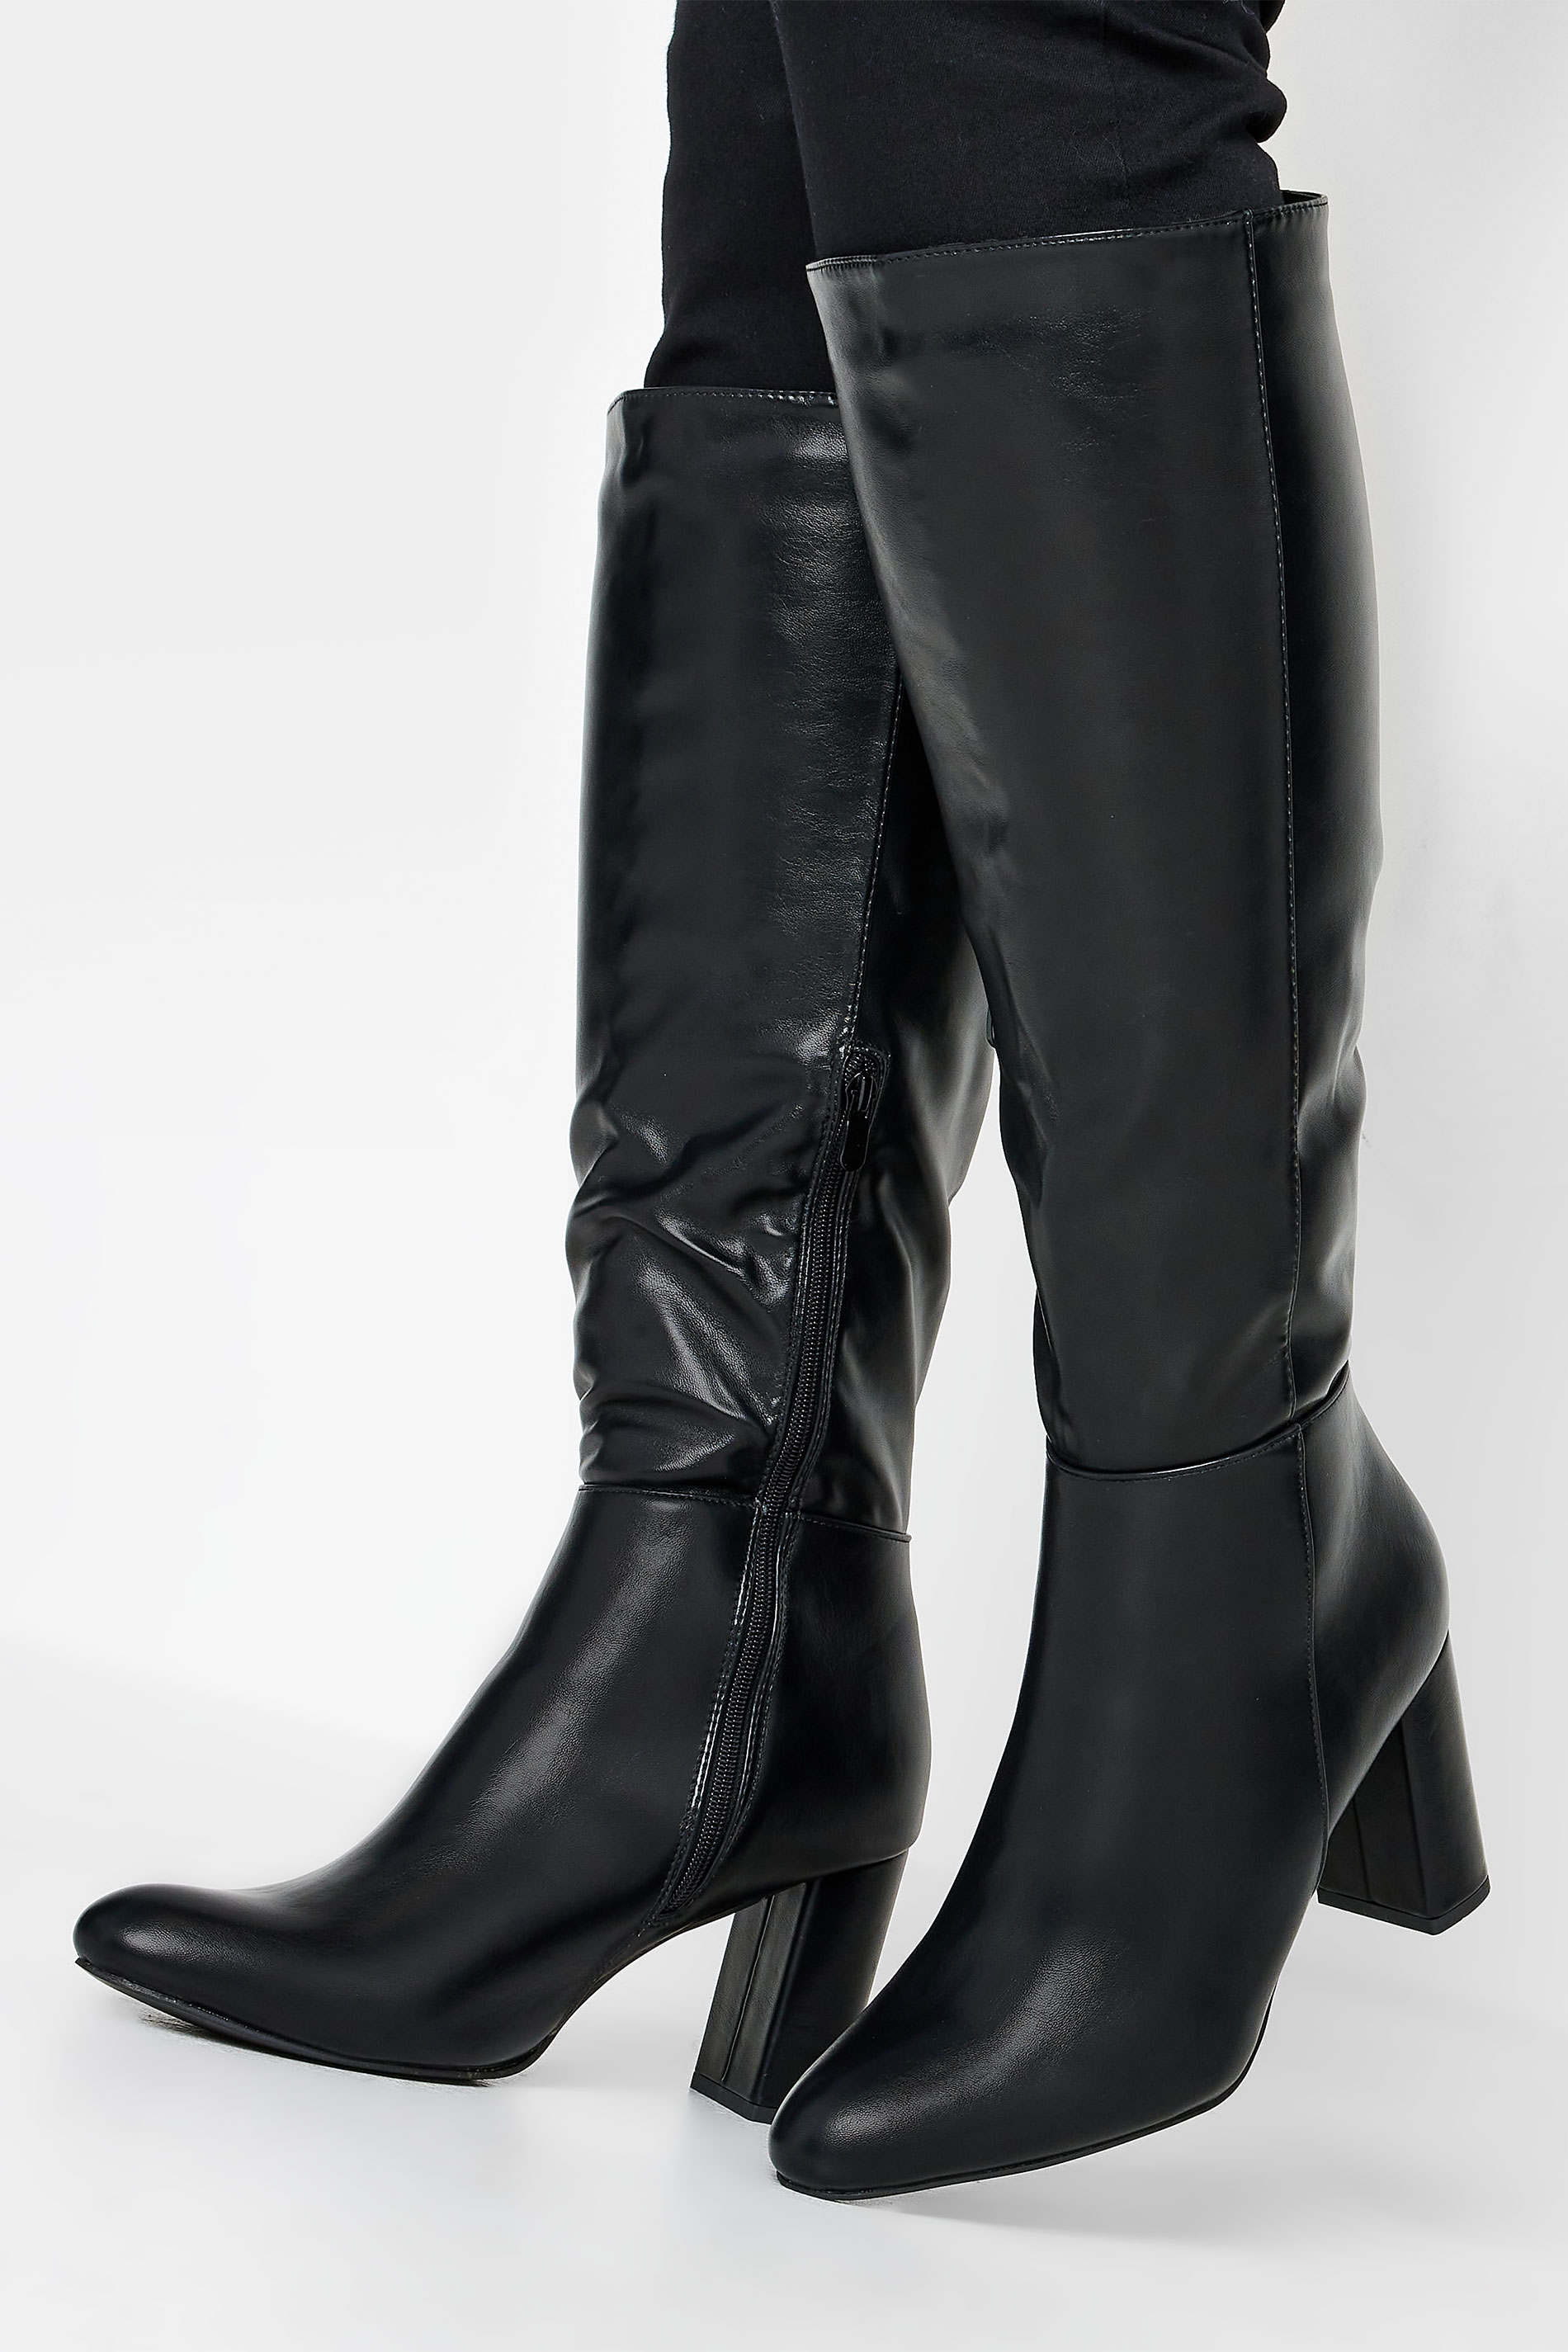 Black Heeled Knee High Boots In Wide E Fit & Extra Wide EEE Fit | Yours Clothing 1